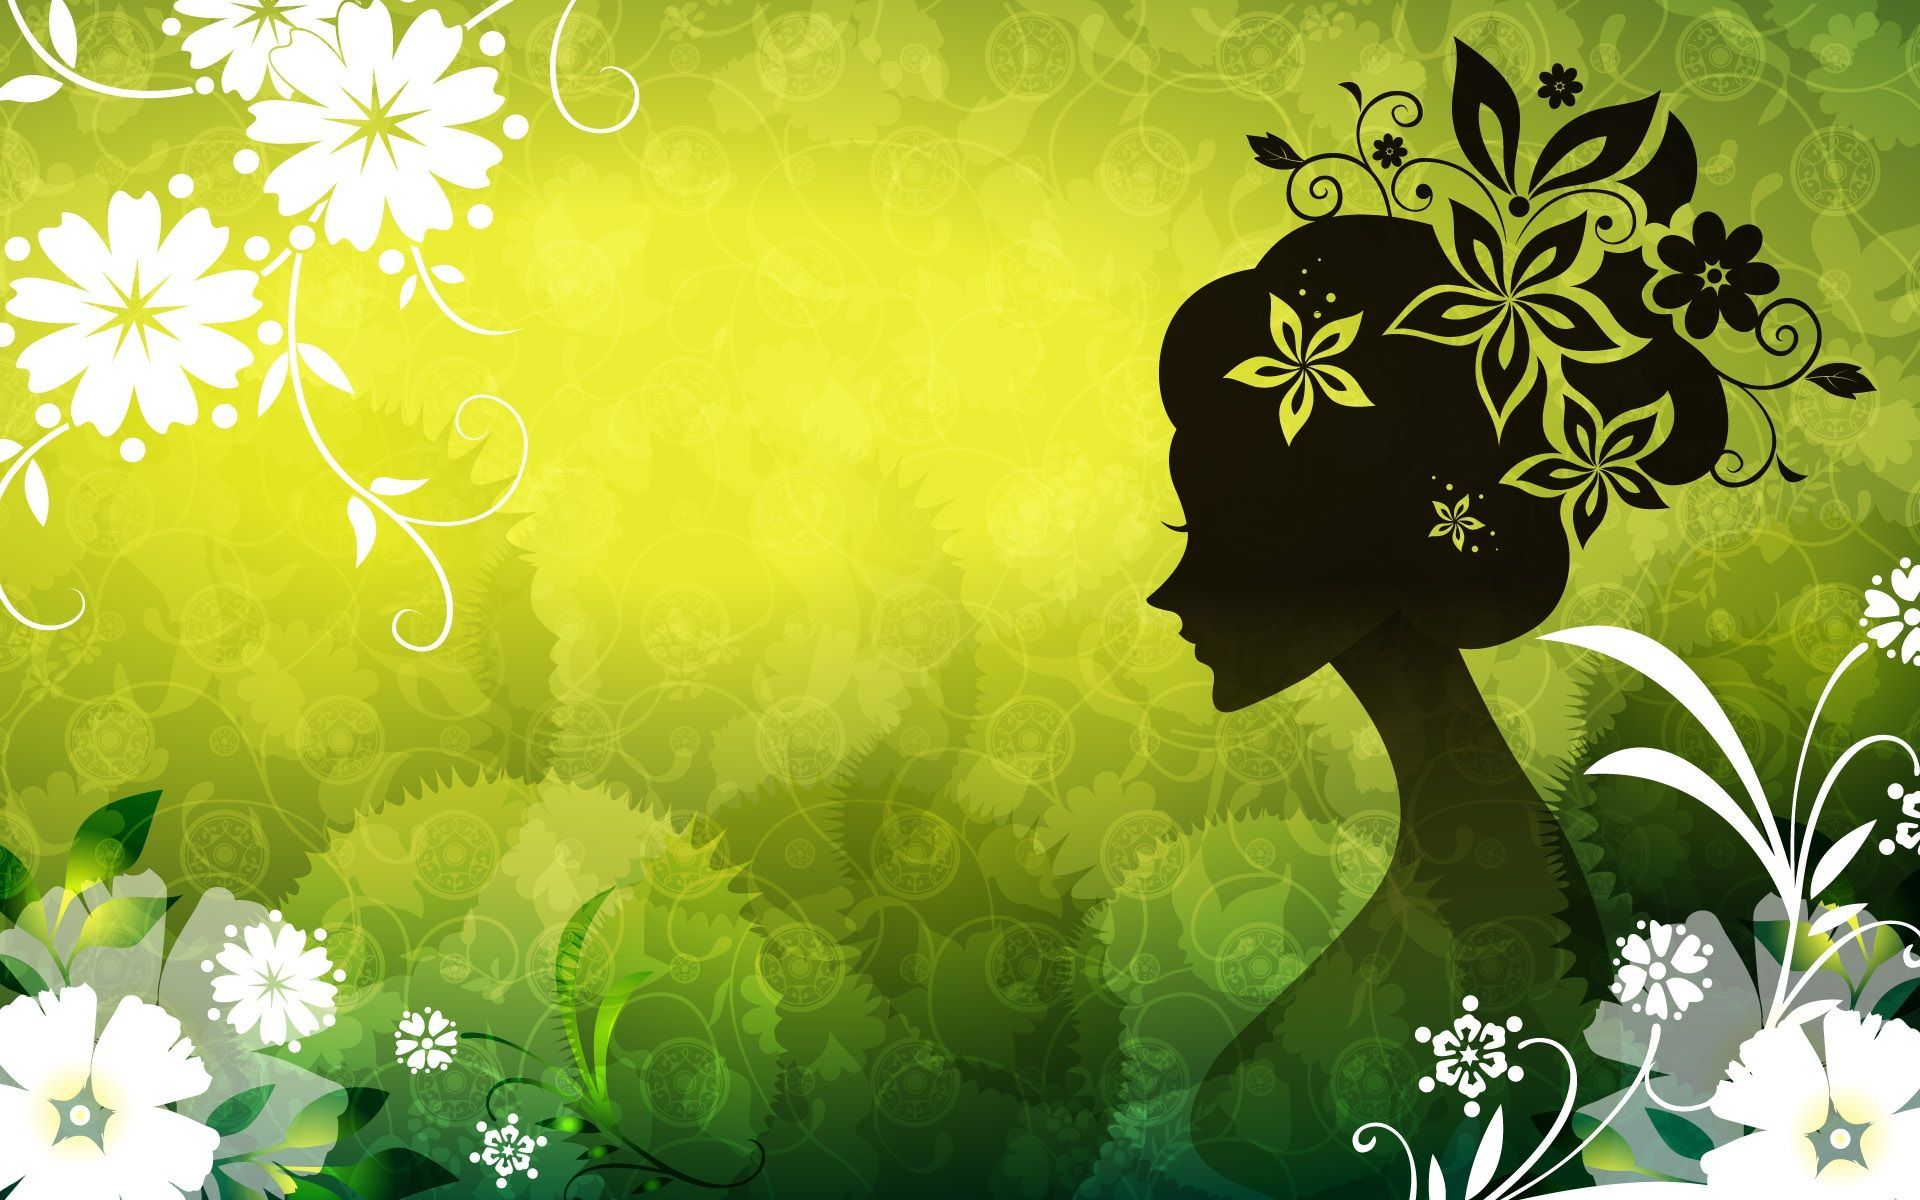 Women and Flowers Abstract Wallpaper Free Women and Flowers Abstract Background